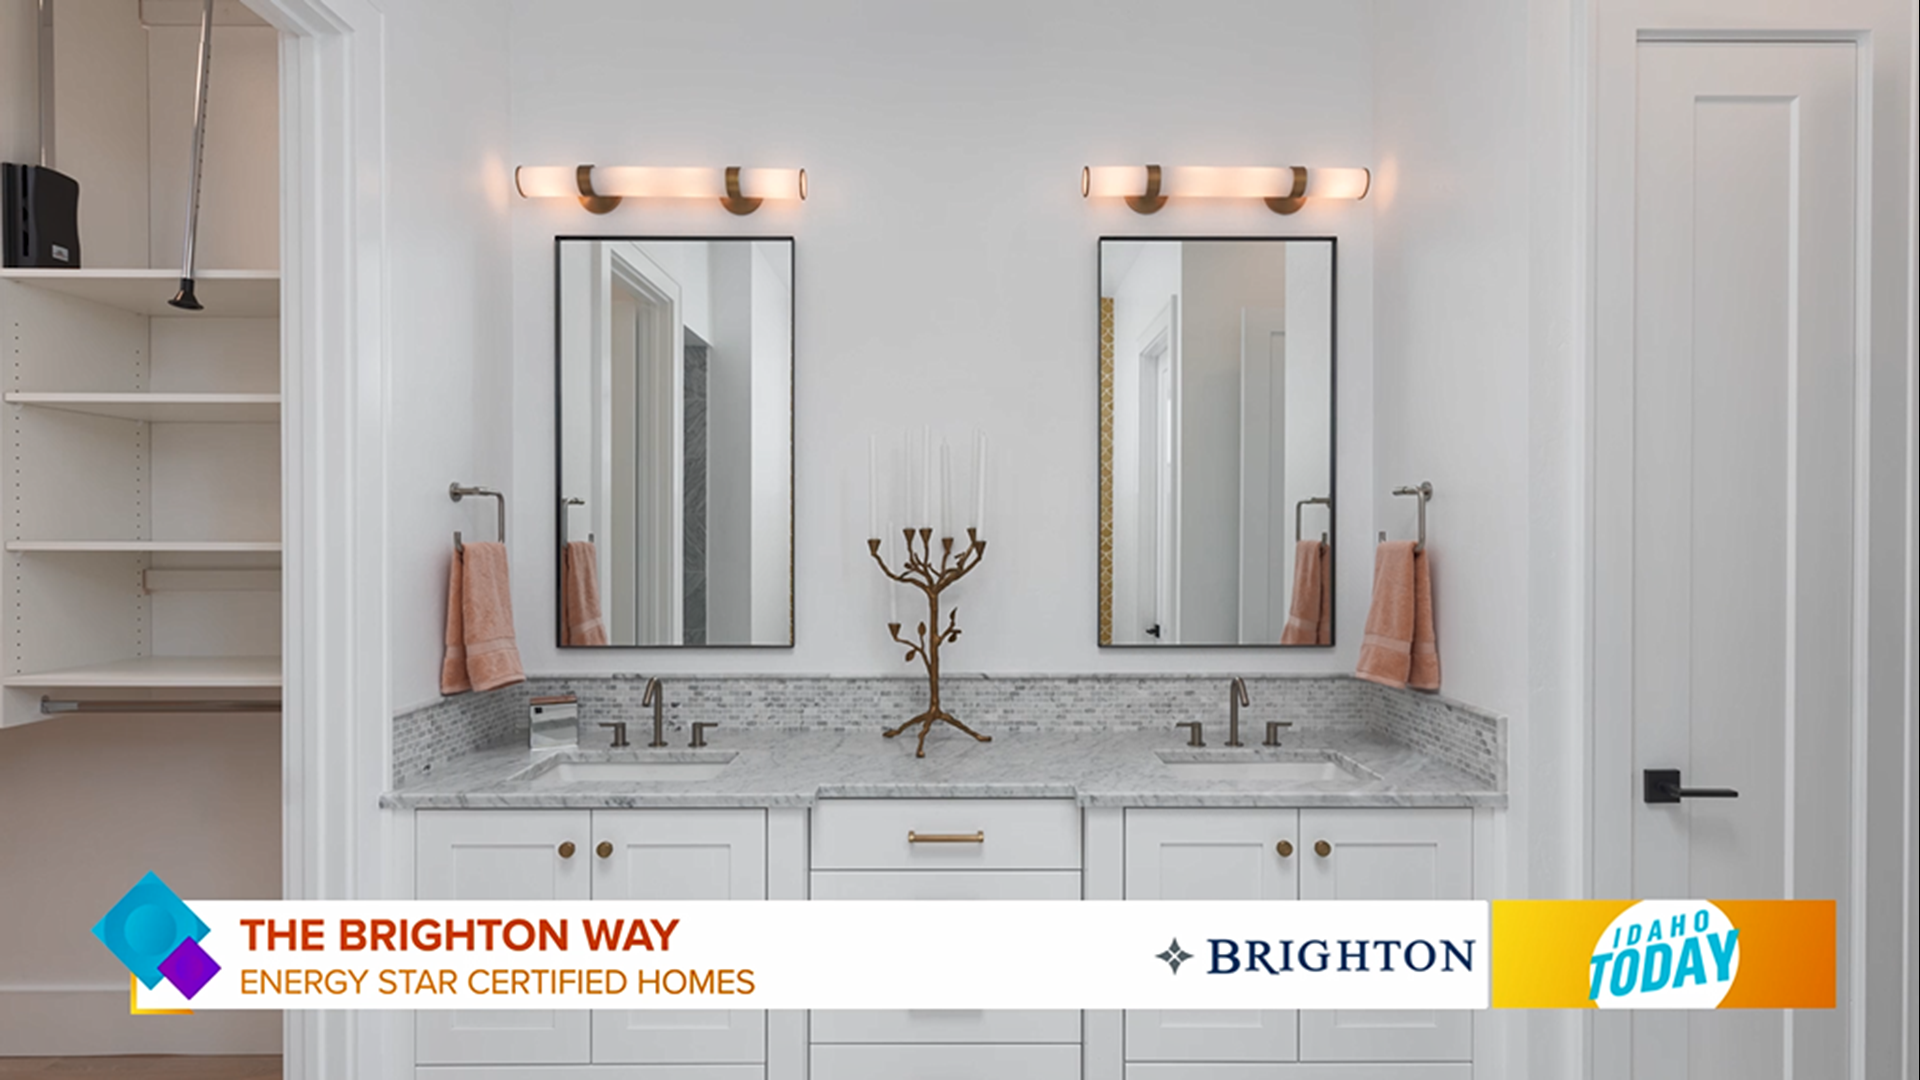 Brighton Homes strives for excellence from the homes to the buying experience.